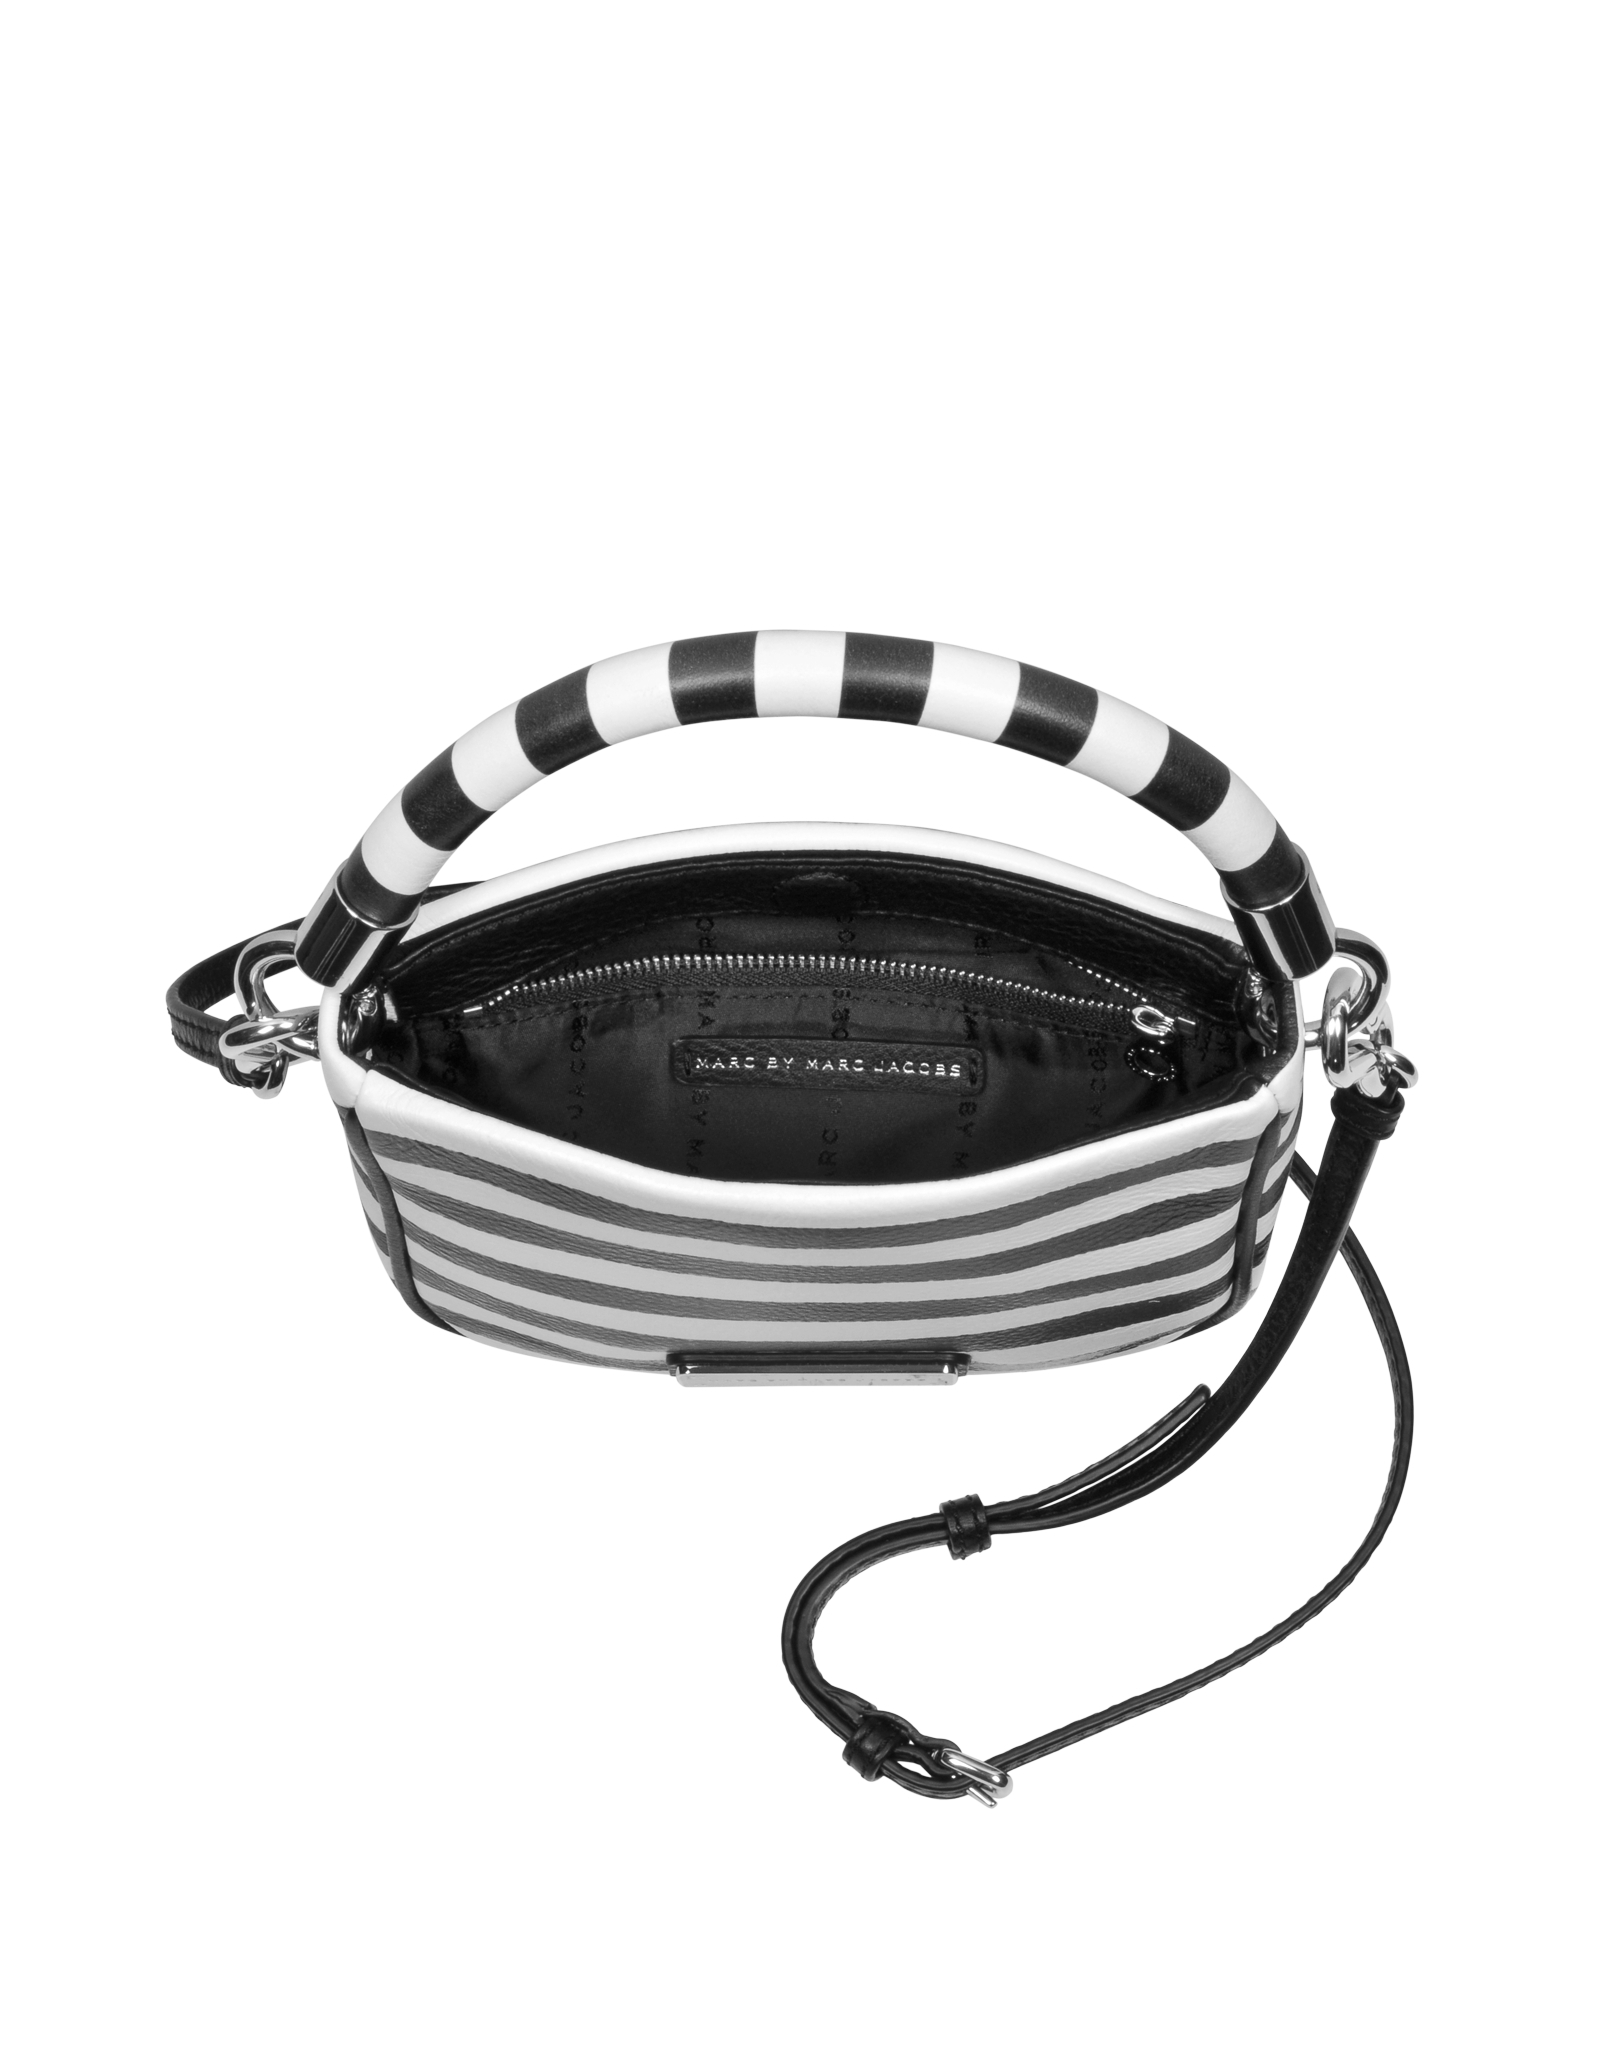 Marc By Marc Jacobs Too Hot To Handle Hoctor Black and White Stripe Leather Crossbody Bag - Lyst